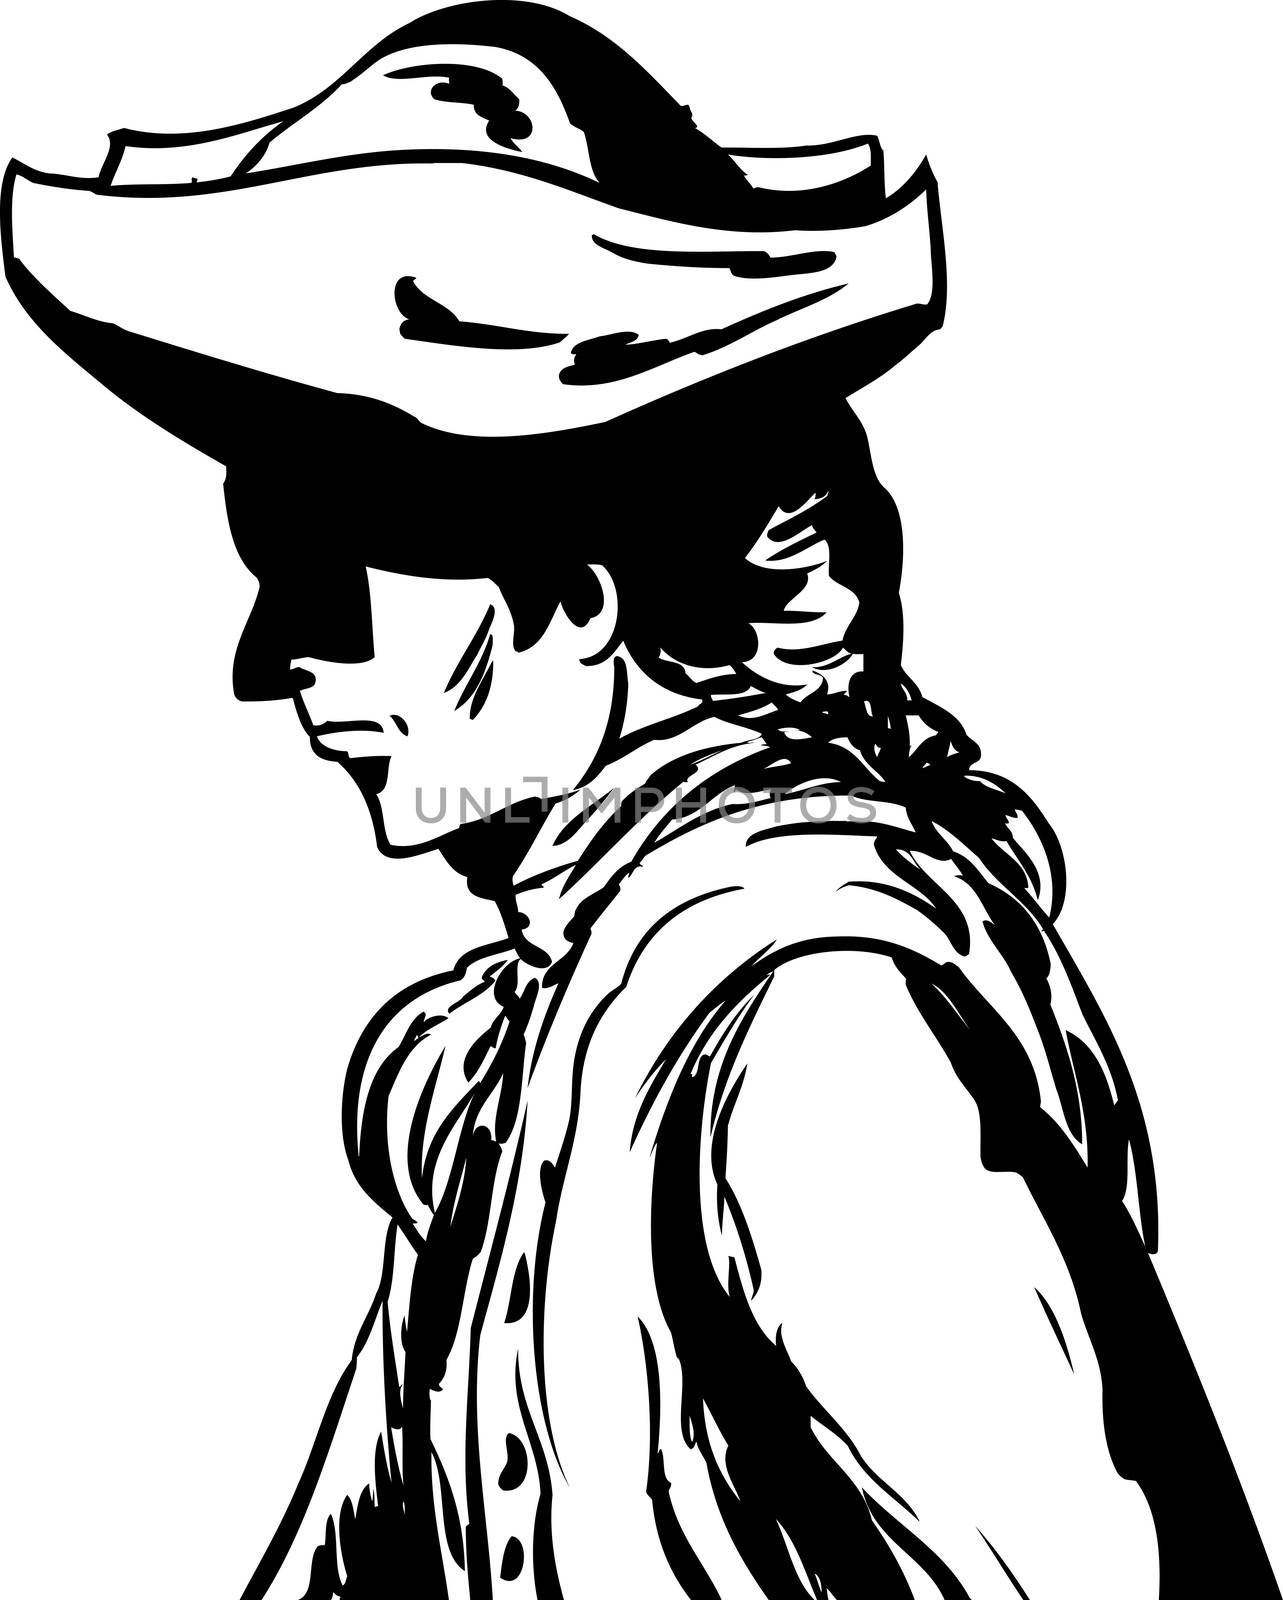 Outlined side view of 18th century man in tricorn hat over white